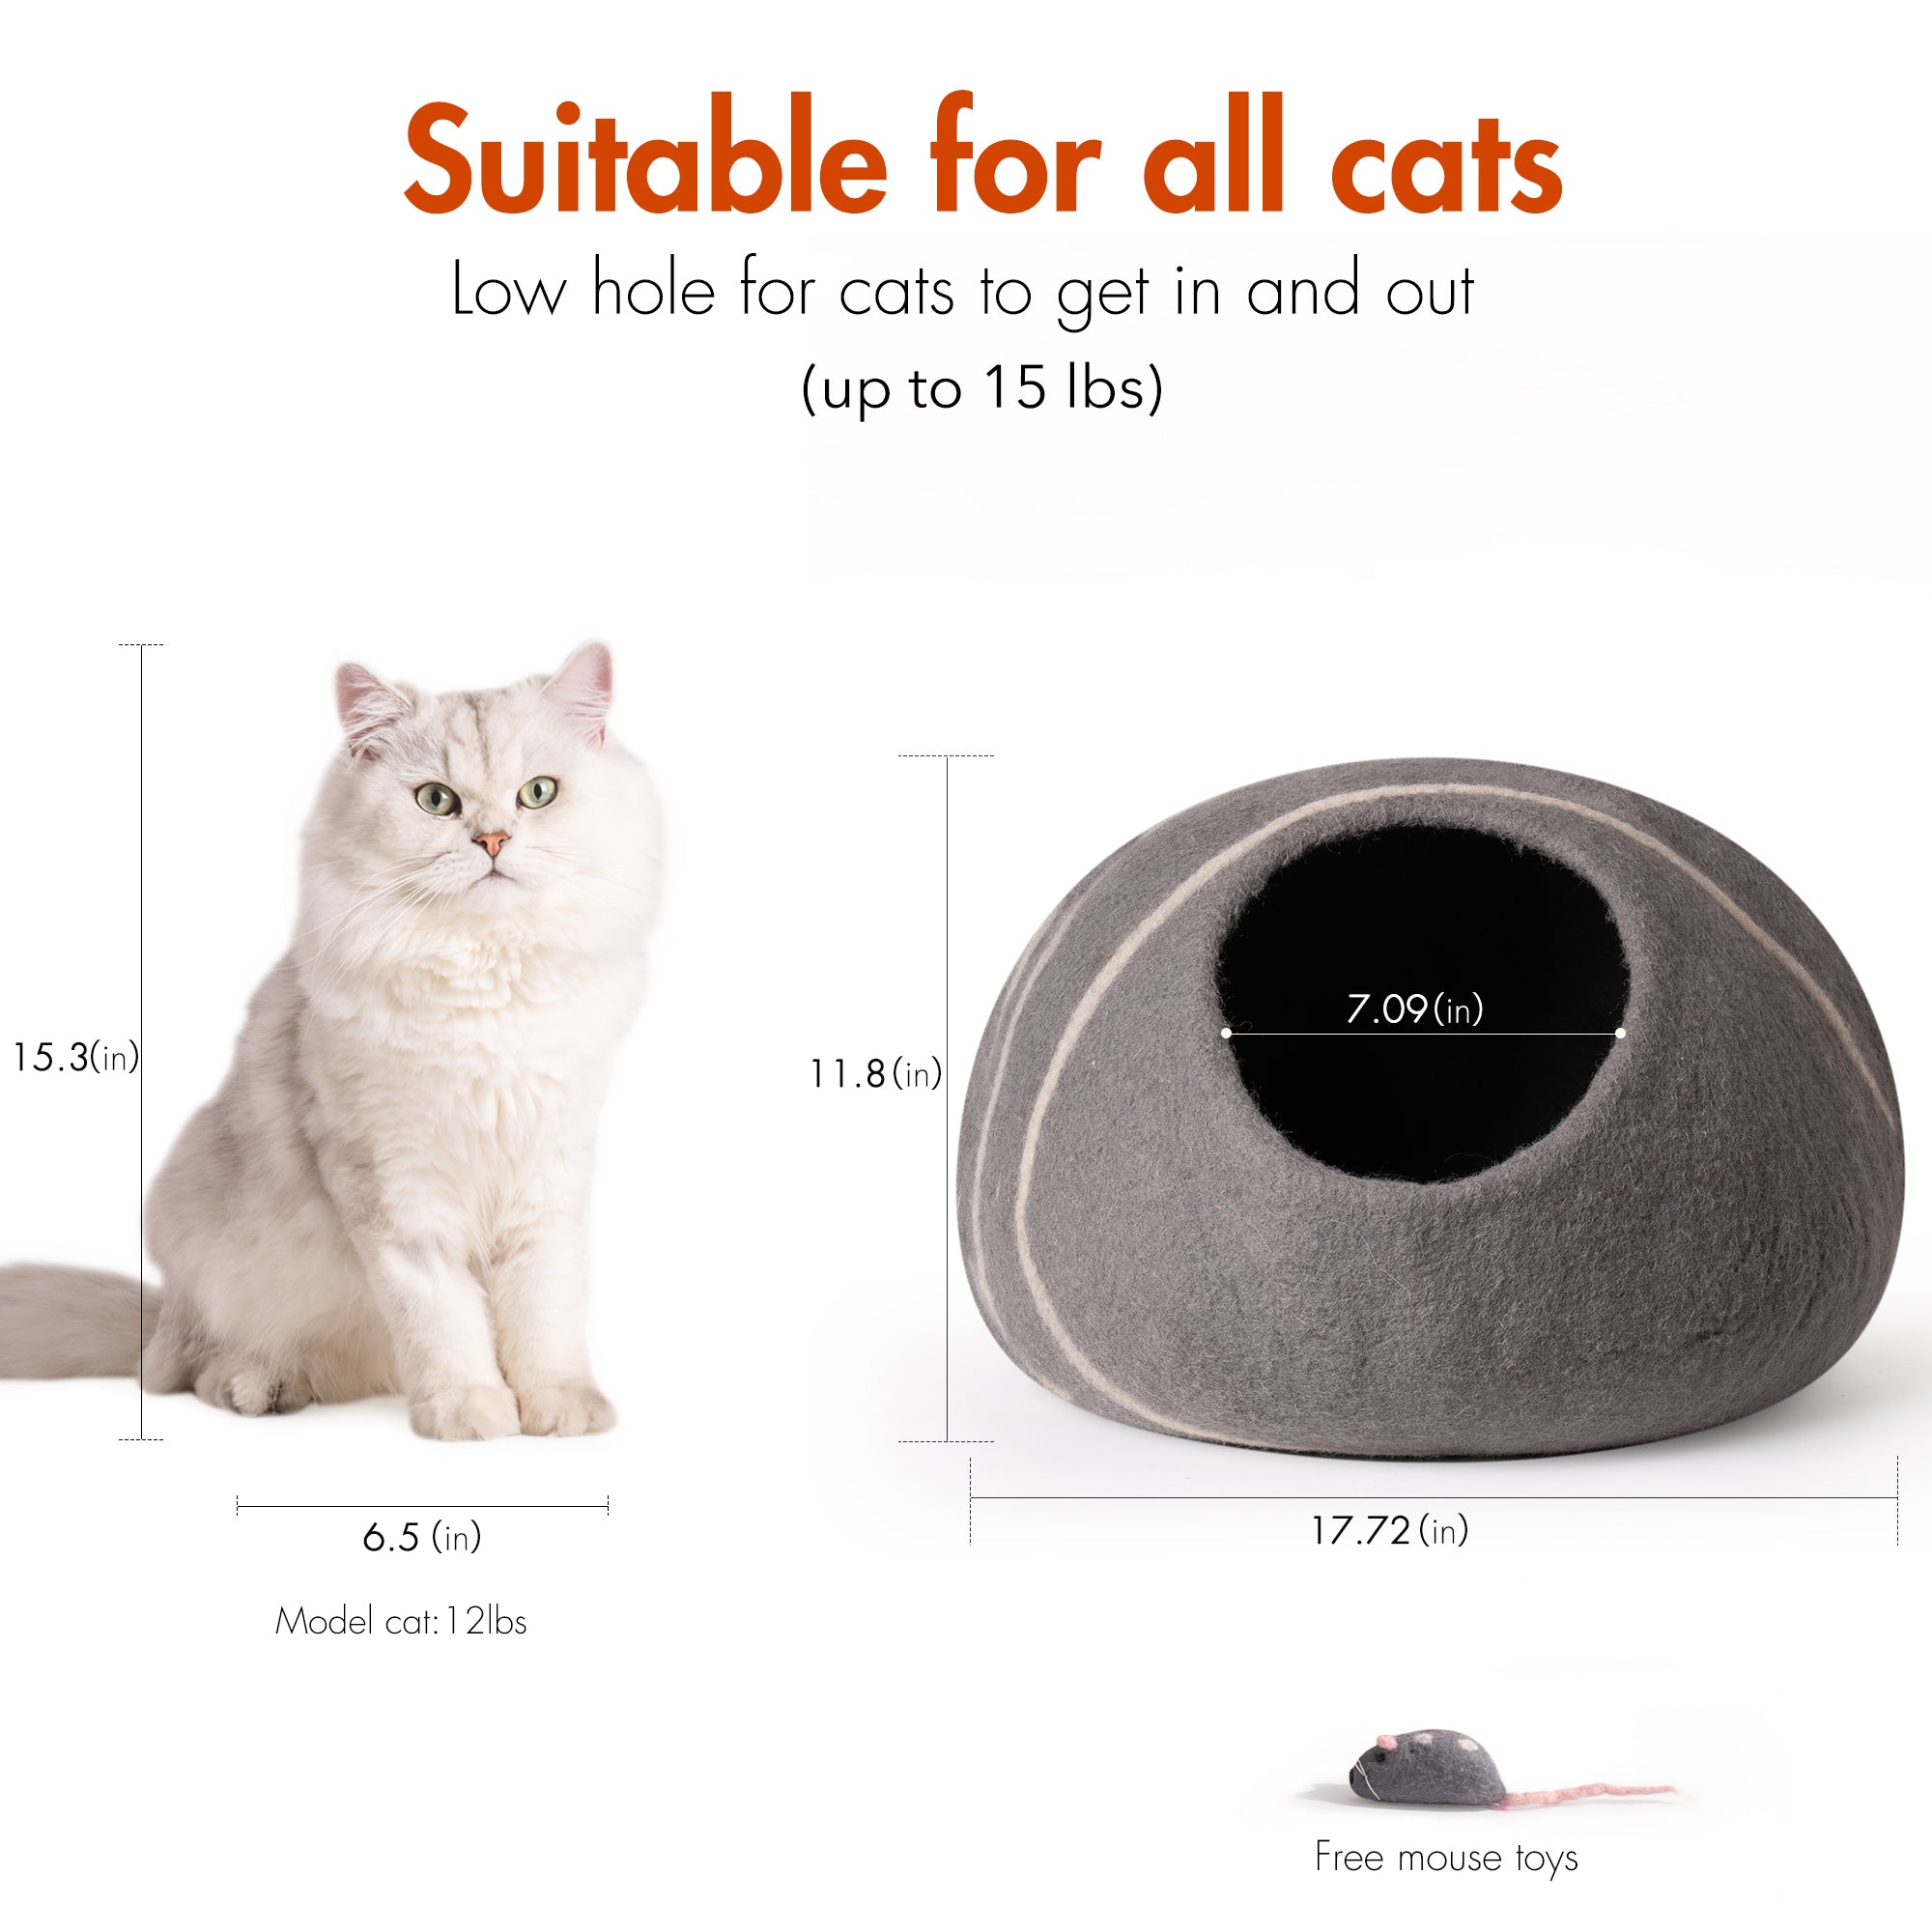 Cat Cave Bed Handmade Wool Cat Bed Cave with Mouse Toy medium grey-wool